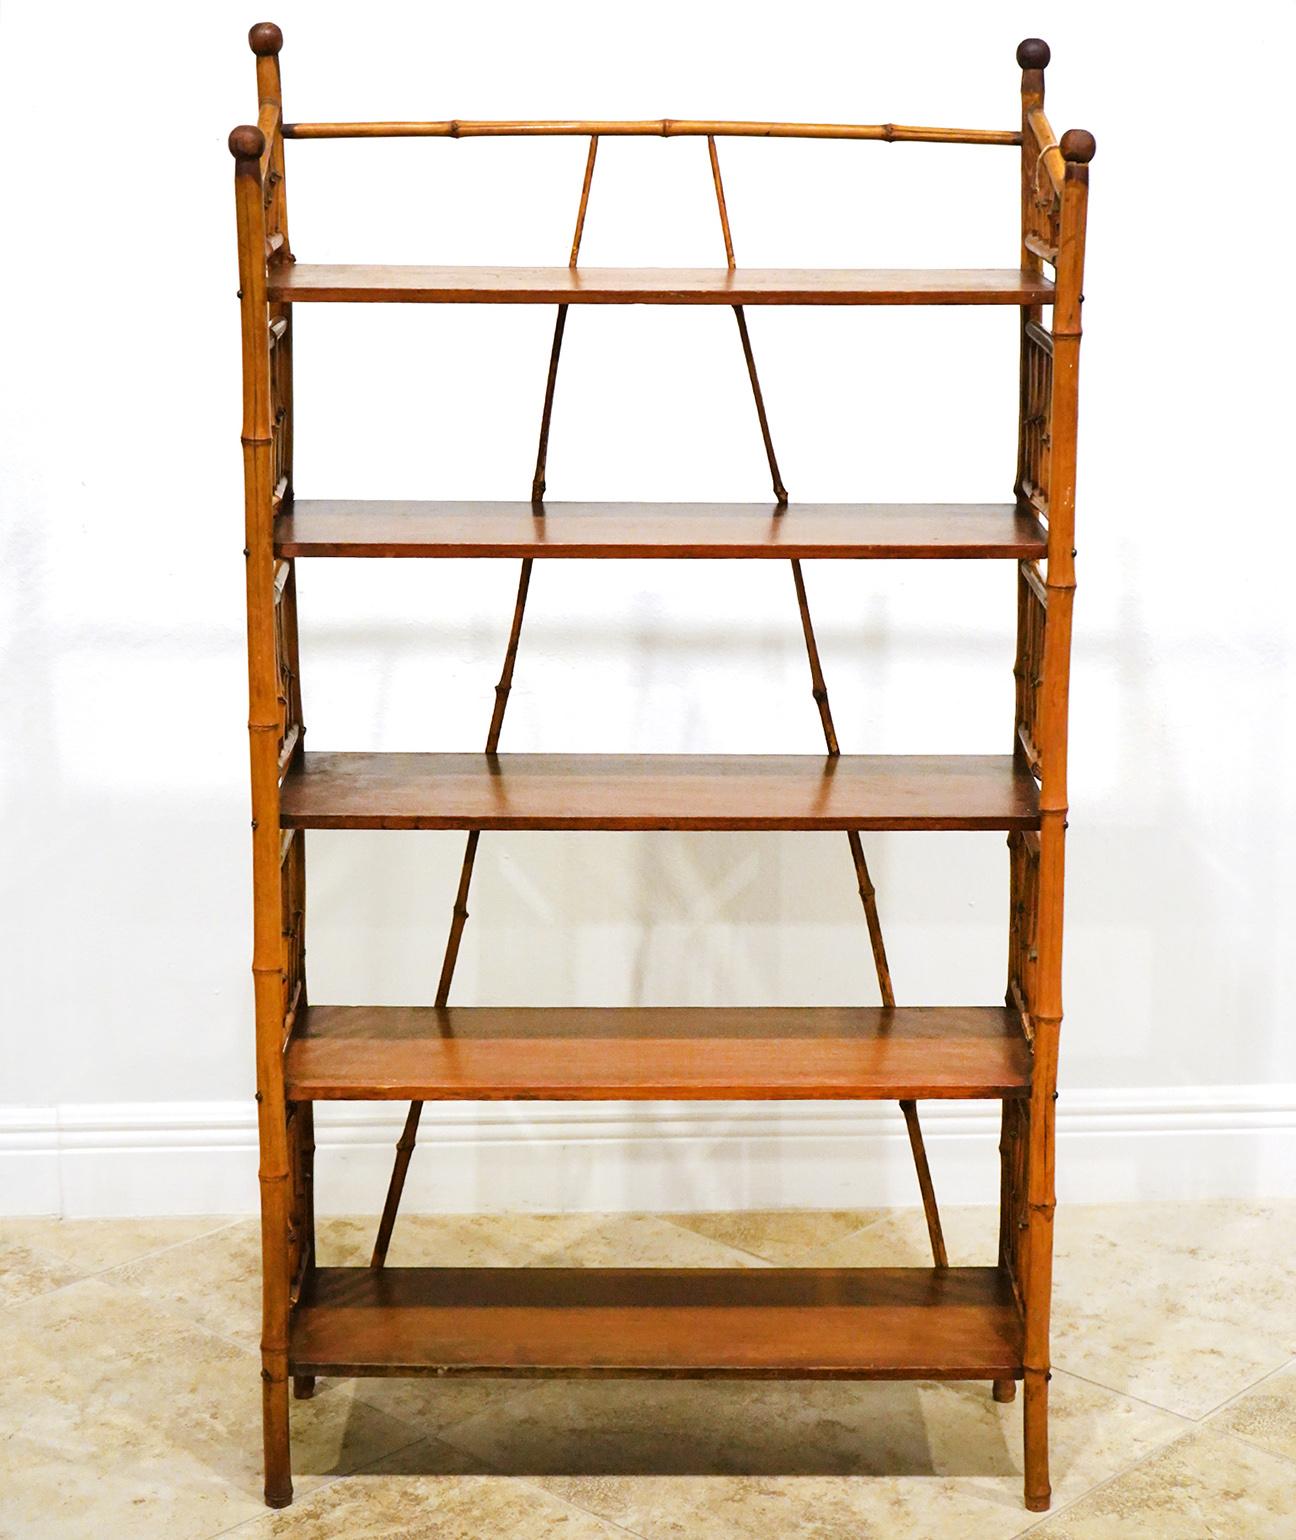 This early 20th bamboo bookshelf features a bamboo framework with mahogany shelves. The design creates a British colonial flair. The two angled bamboo rods create structural rigidity as well a an aesthetic effect.